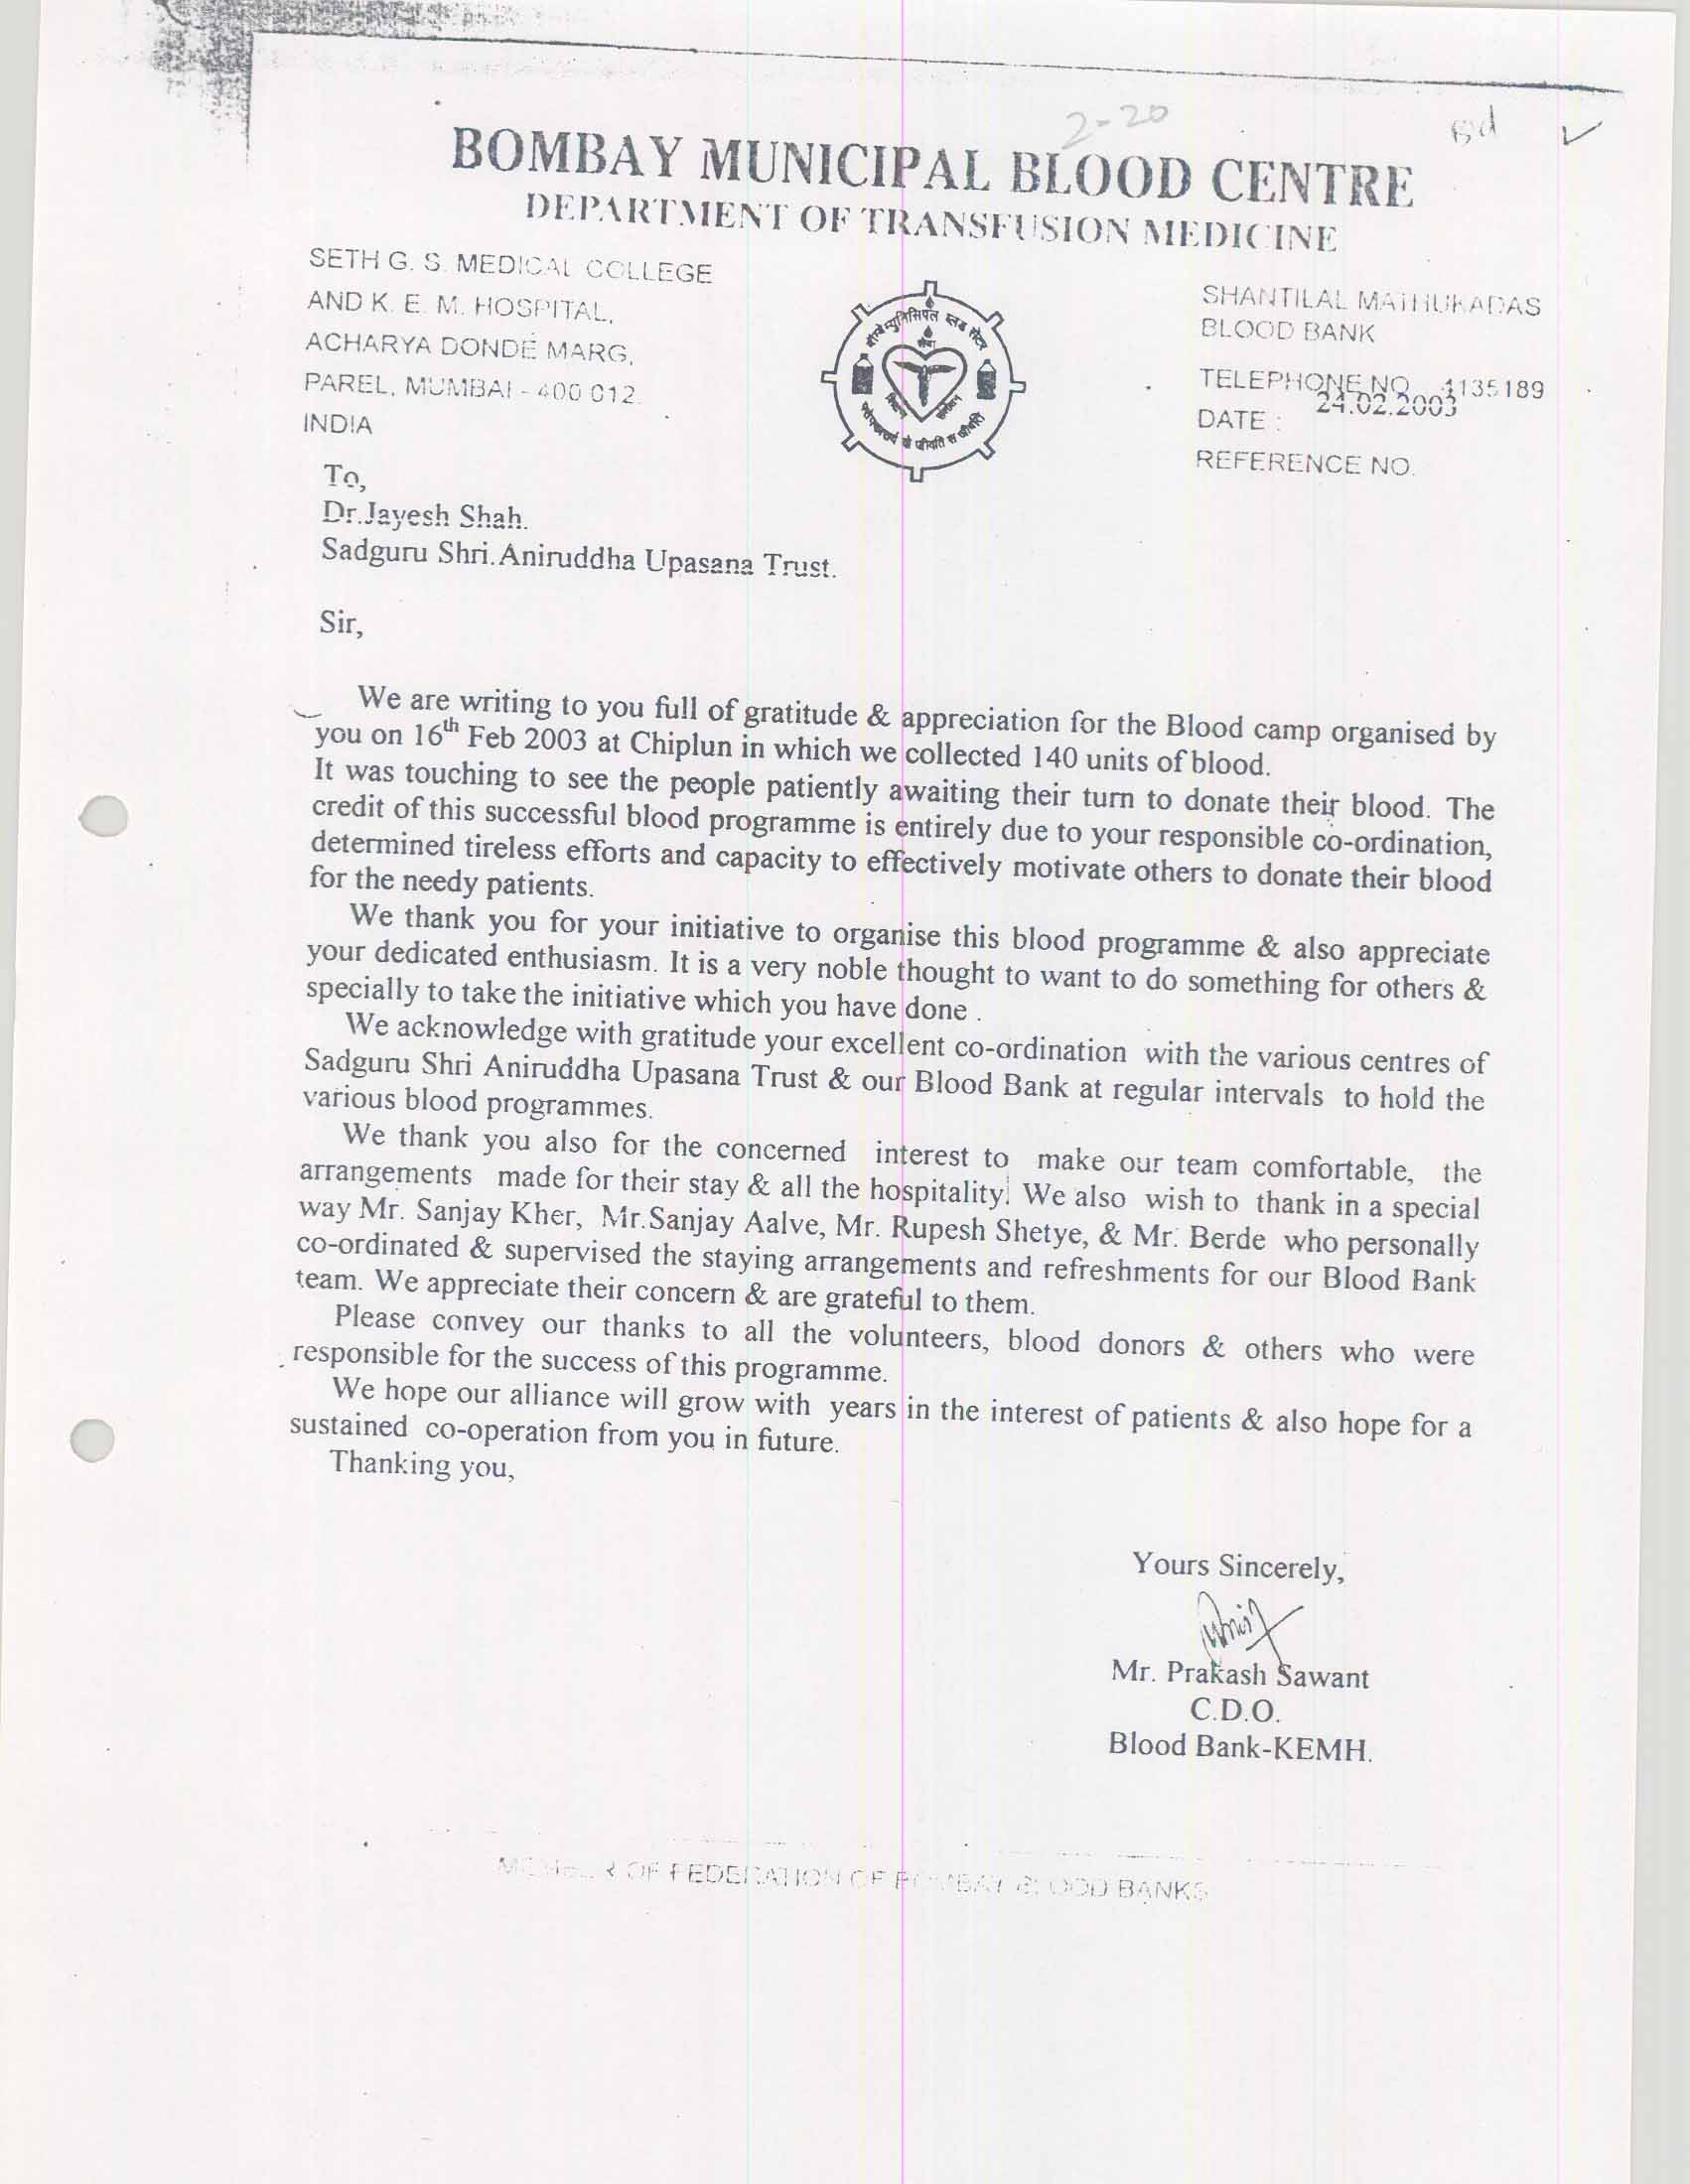 Appreciation-Letter from Bombay Blood Bank 2003-for-Aniruddhafoundation-Compassion-Social-services